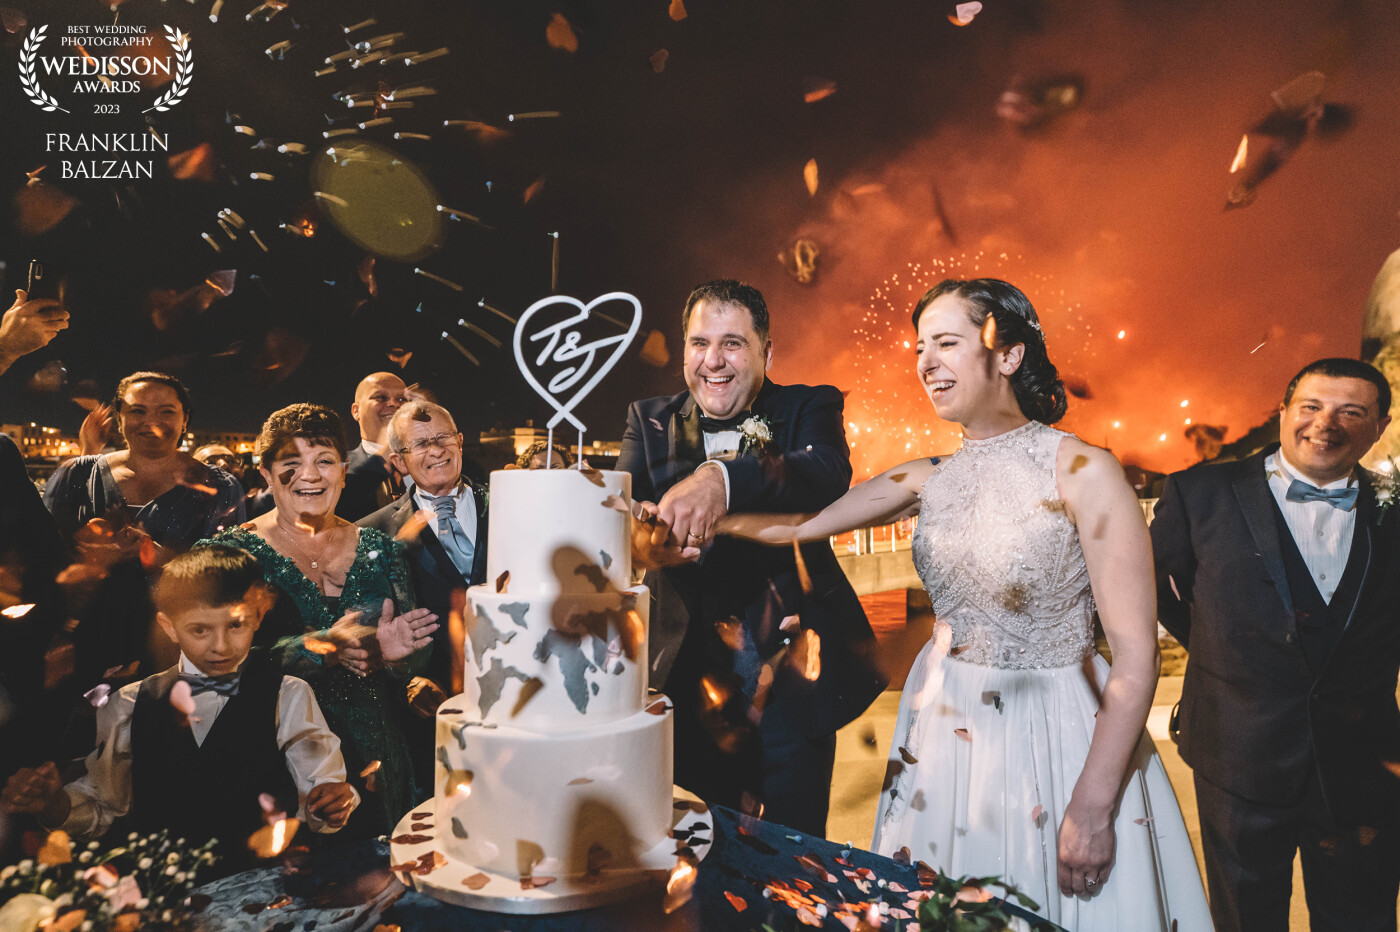 Amazing cutting of the cake with fireworks from behind!